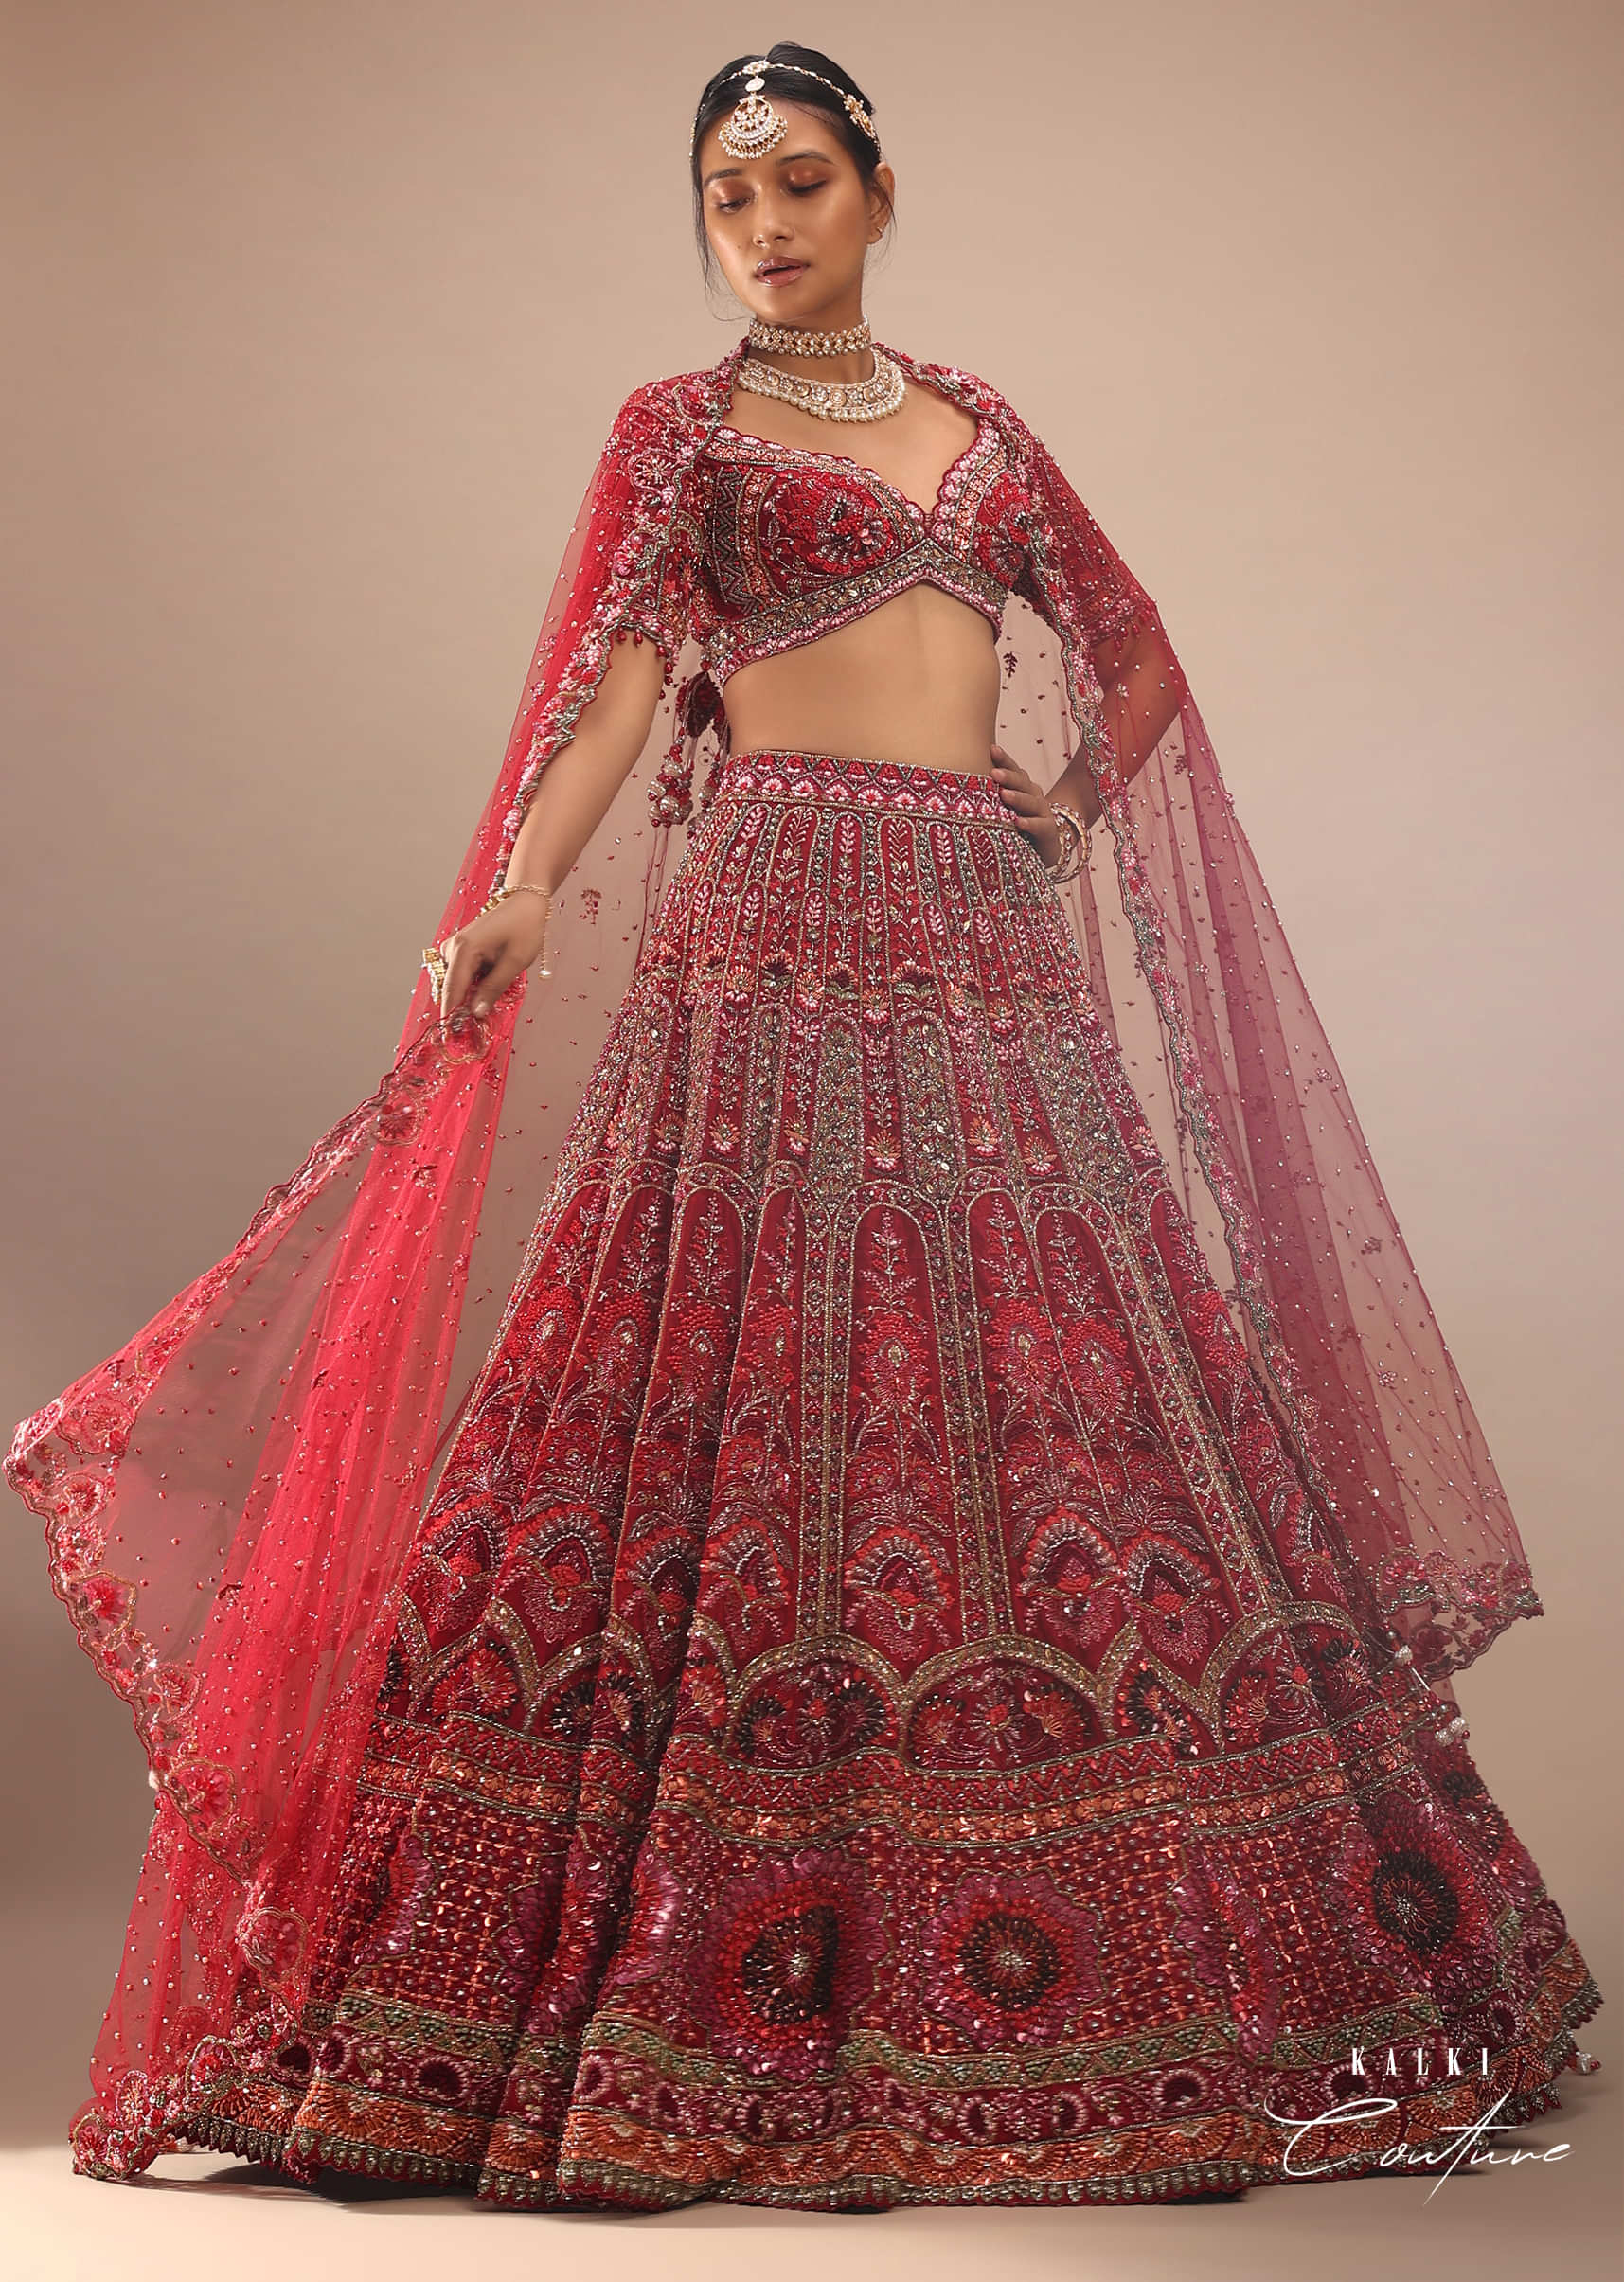 Buy Red Royal Heritage Lehenga And A Choli Set In 3D Petal Motifs  Embroidery, Organza Multi Color Dupatta In Zari Work Embroidery Buttis